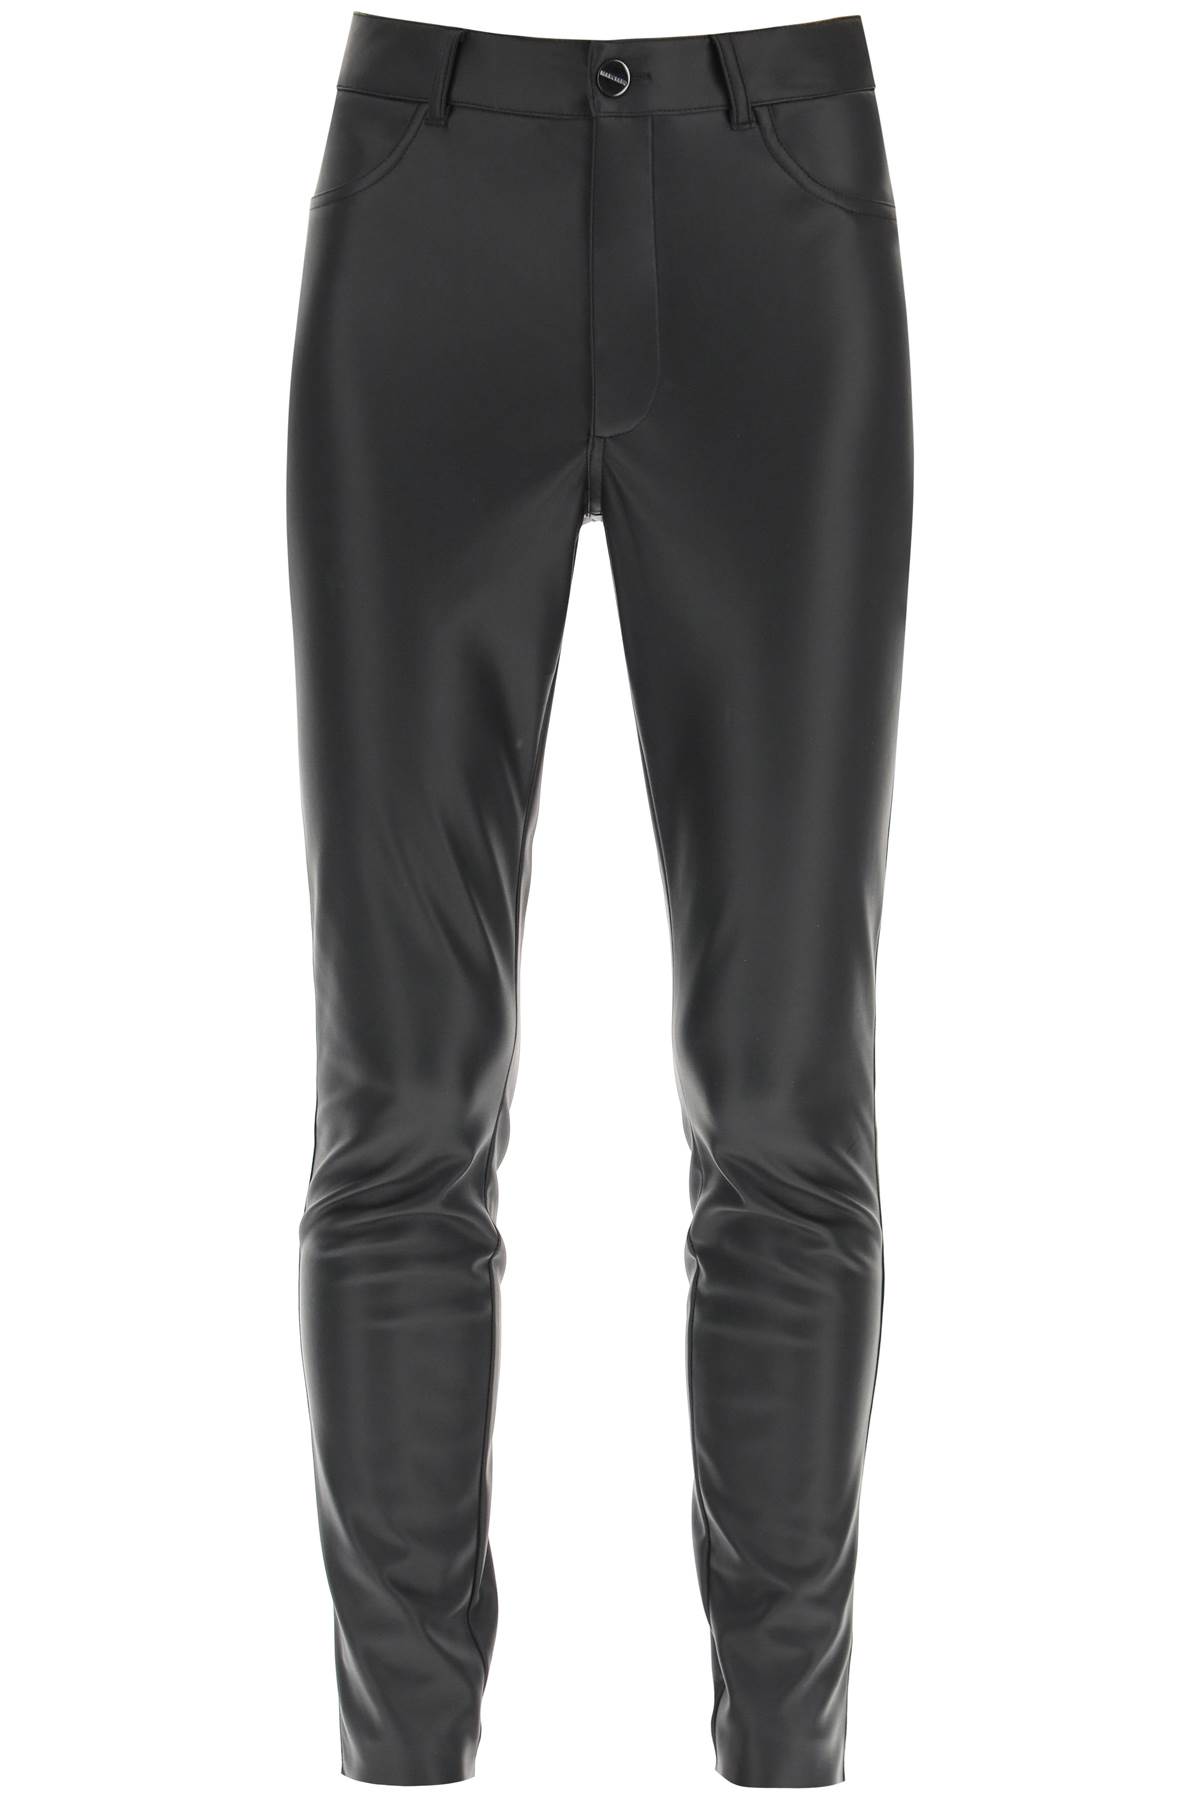 GUESS® MARCIANO REAL LEATHER LEGGING